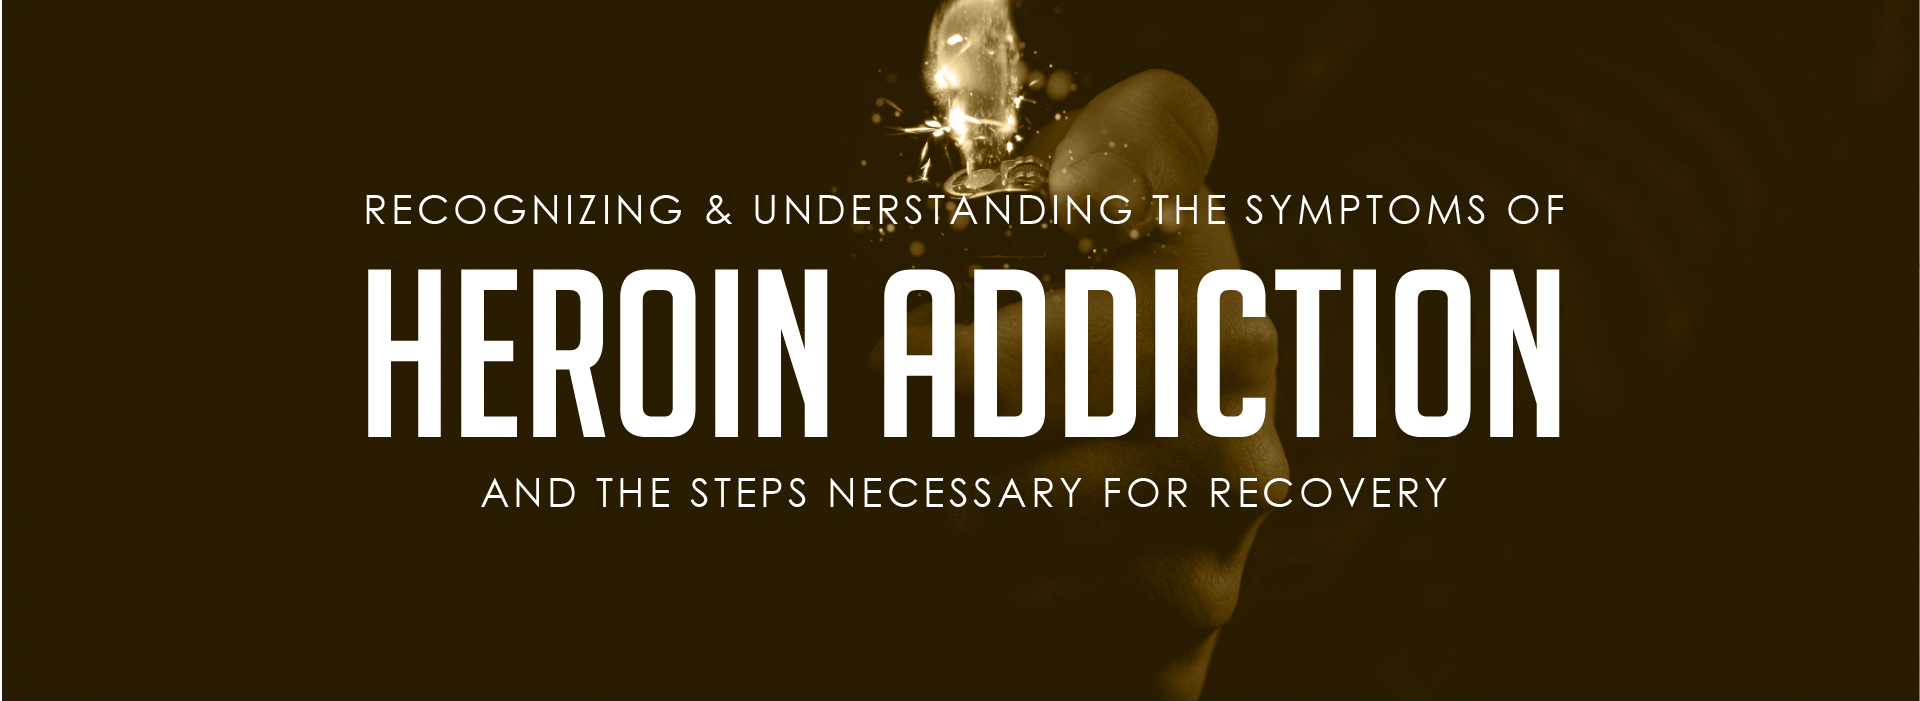 Recognizing and understanding the symptoms of heroin addiction and the steps necessary for recovery